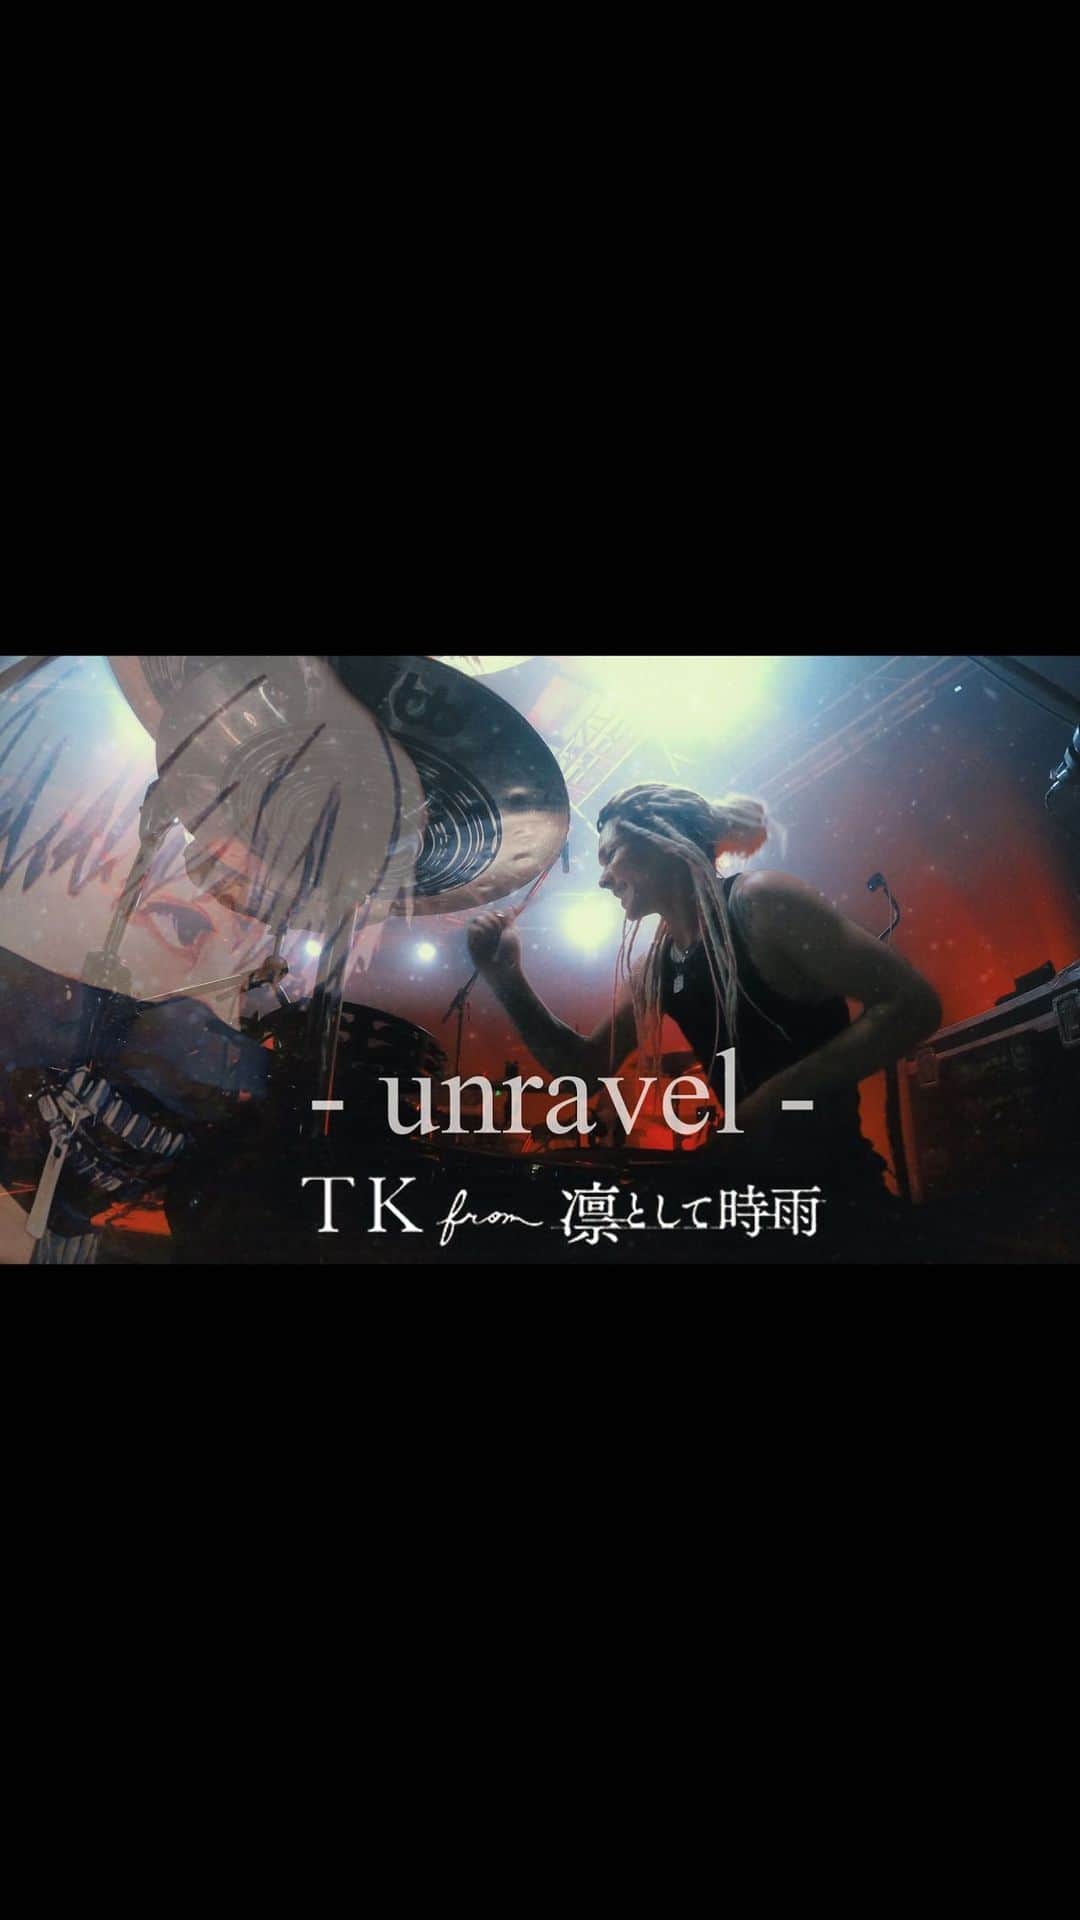 Tatsuya Amanoのインスタグラム：「YoutubeにTKさん @tk_snsfakeshow の中国ツアーからunravelのドラムカムをアップしました🔥 ブレアの時とはまた色の違うエモーションをたっぷりと注いだので気に入ってもらえると嬉しいな！🤘 ⁡ I put all the emotion I could express into this song “unravel”. Full length is on Youtube link in my bio. I hope you love it🥁❤️‍🔥 ⁡ 谢谢您让我度过了快乐的时光！ 我希望你喜欢观看这个视频🔥 ⁡ Drum mixed by myself. Mix boosted by TK san. ⁡ 9月10日(日)大阪 Zepp Osaka Bayside 9月16日(土)愛知 Zepp Nagoya  9月24日(日)東京 Zepp Haneda  ⁡ #TKfrom凛として時雨 #unravel #東京グール #tokyoghoul #Drums #Drumcam #ドラム #meinlcymbals #promarksticks #ZOOMH8 #Lewitt」